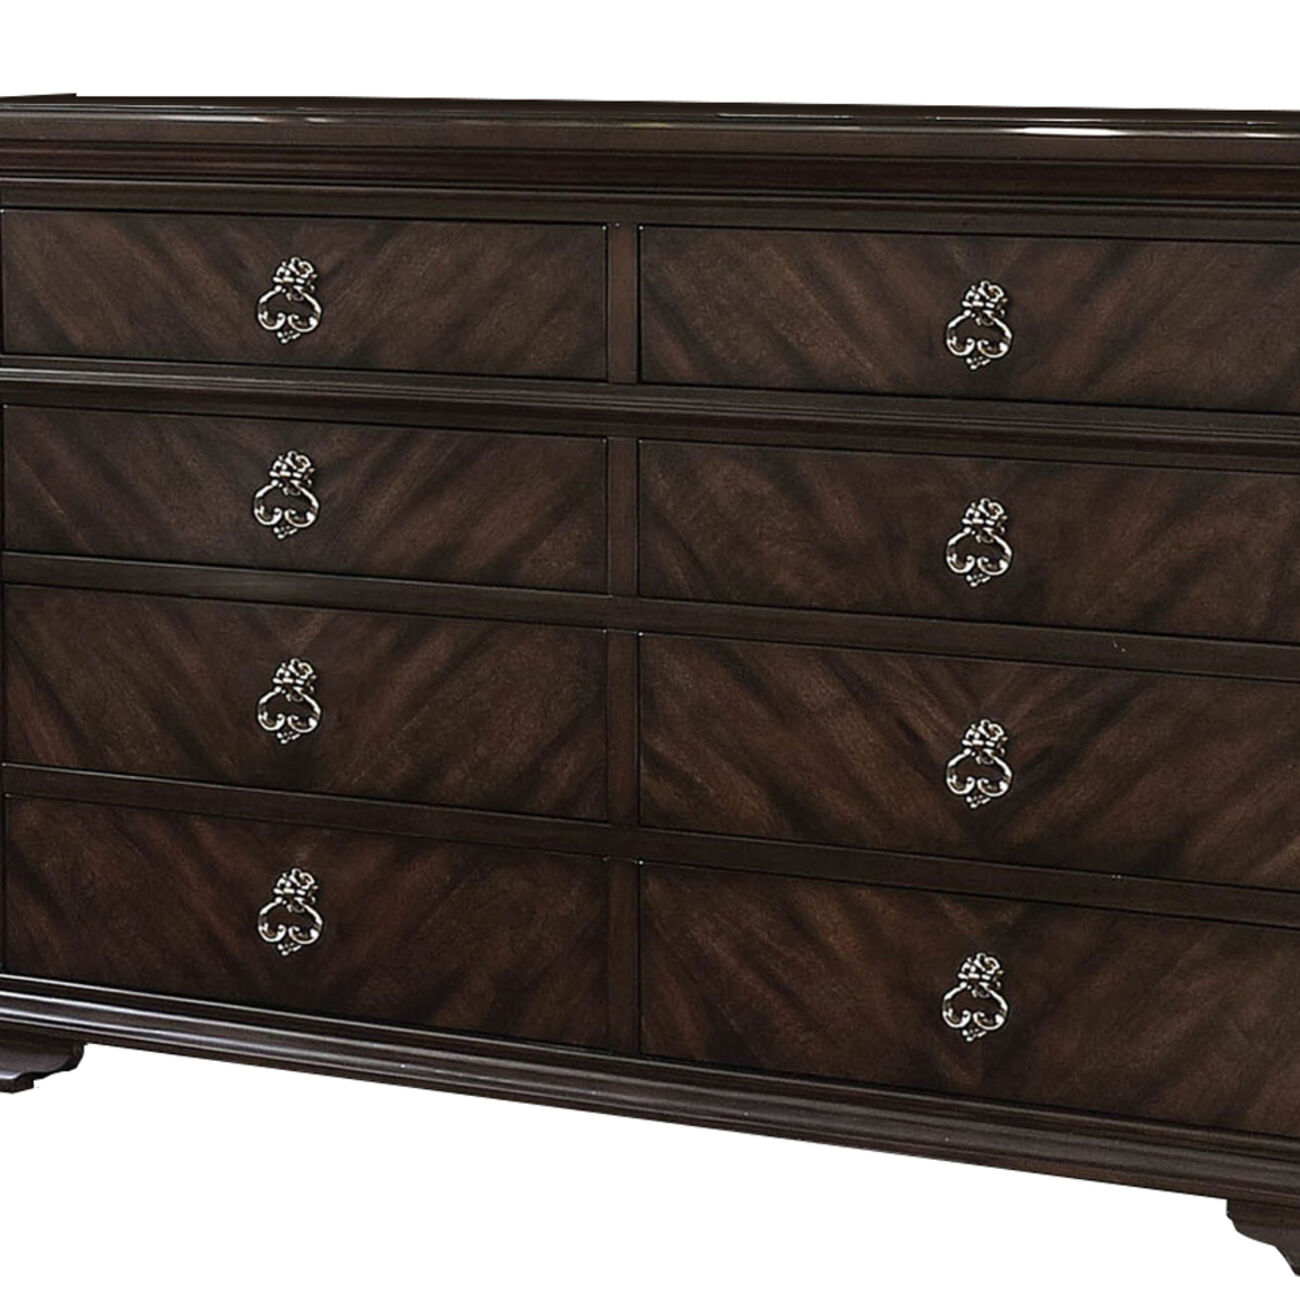 Traditional 8 Drawer Wooden Dresser with Bracket Legs Support, Brown